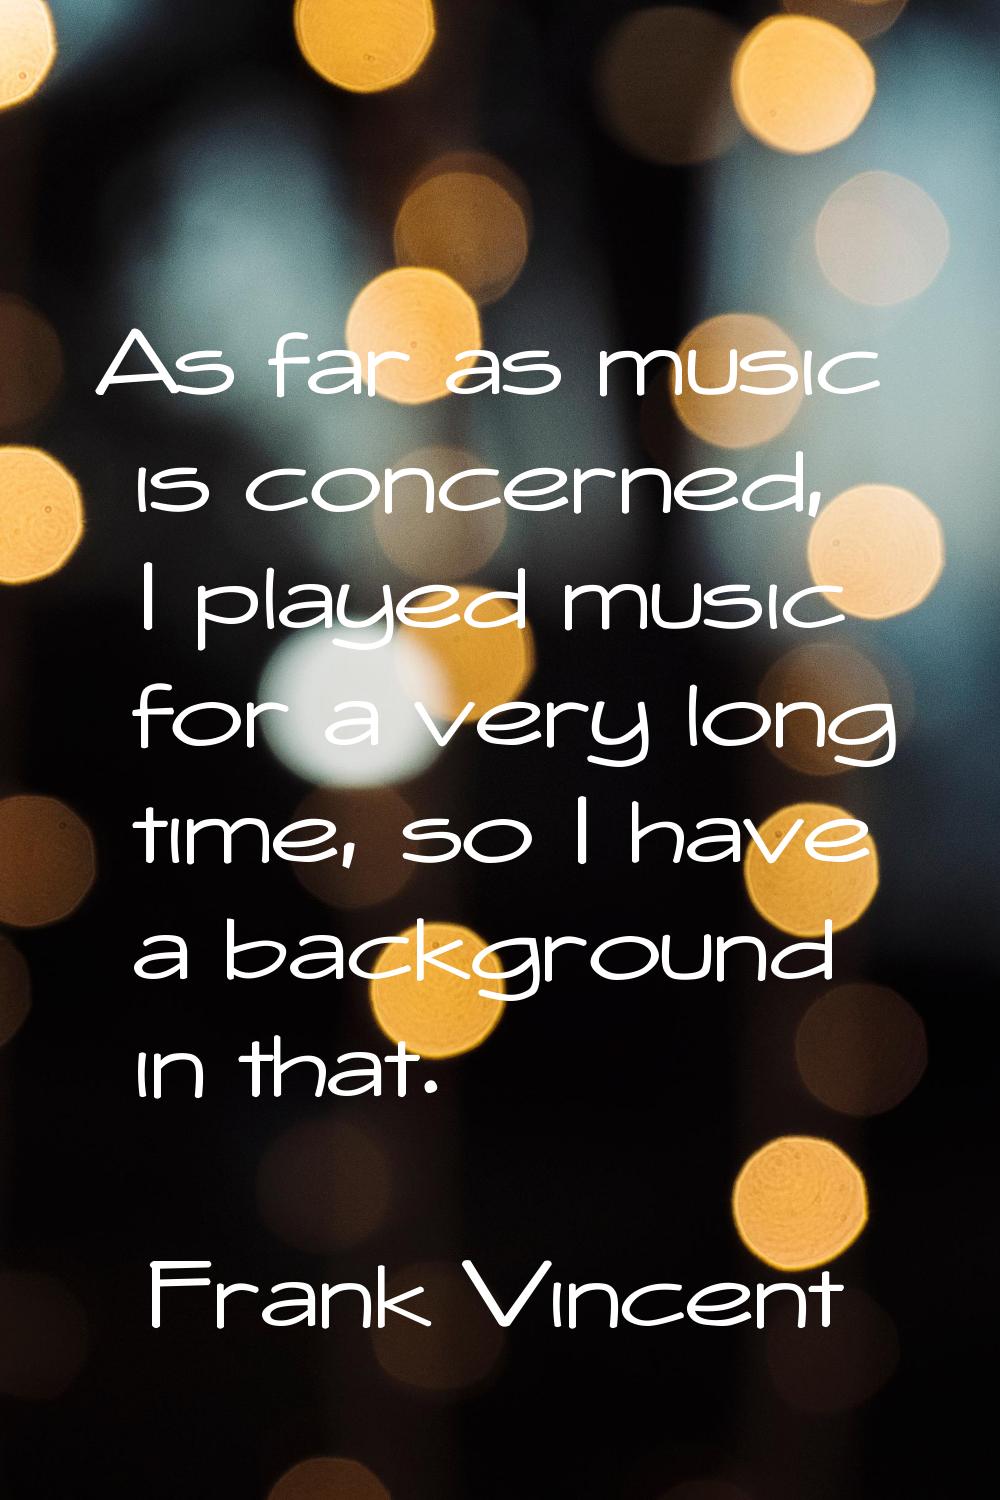 As far as music is concerned, I played music for a very long time, so I have a background in that.